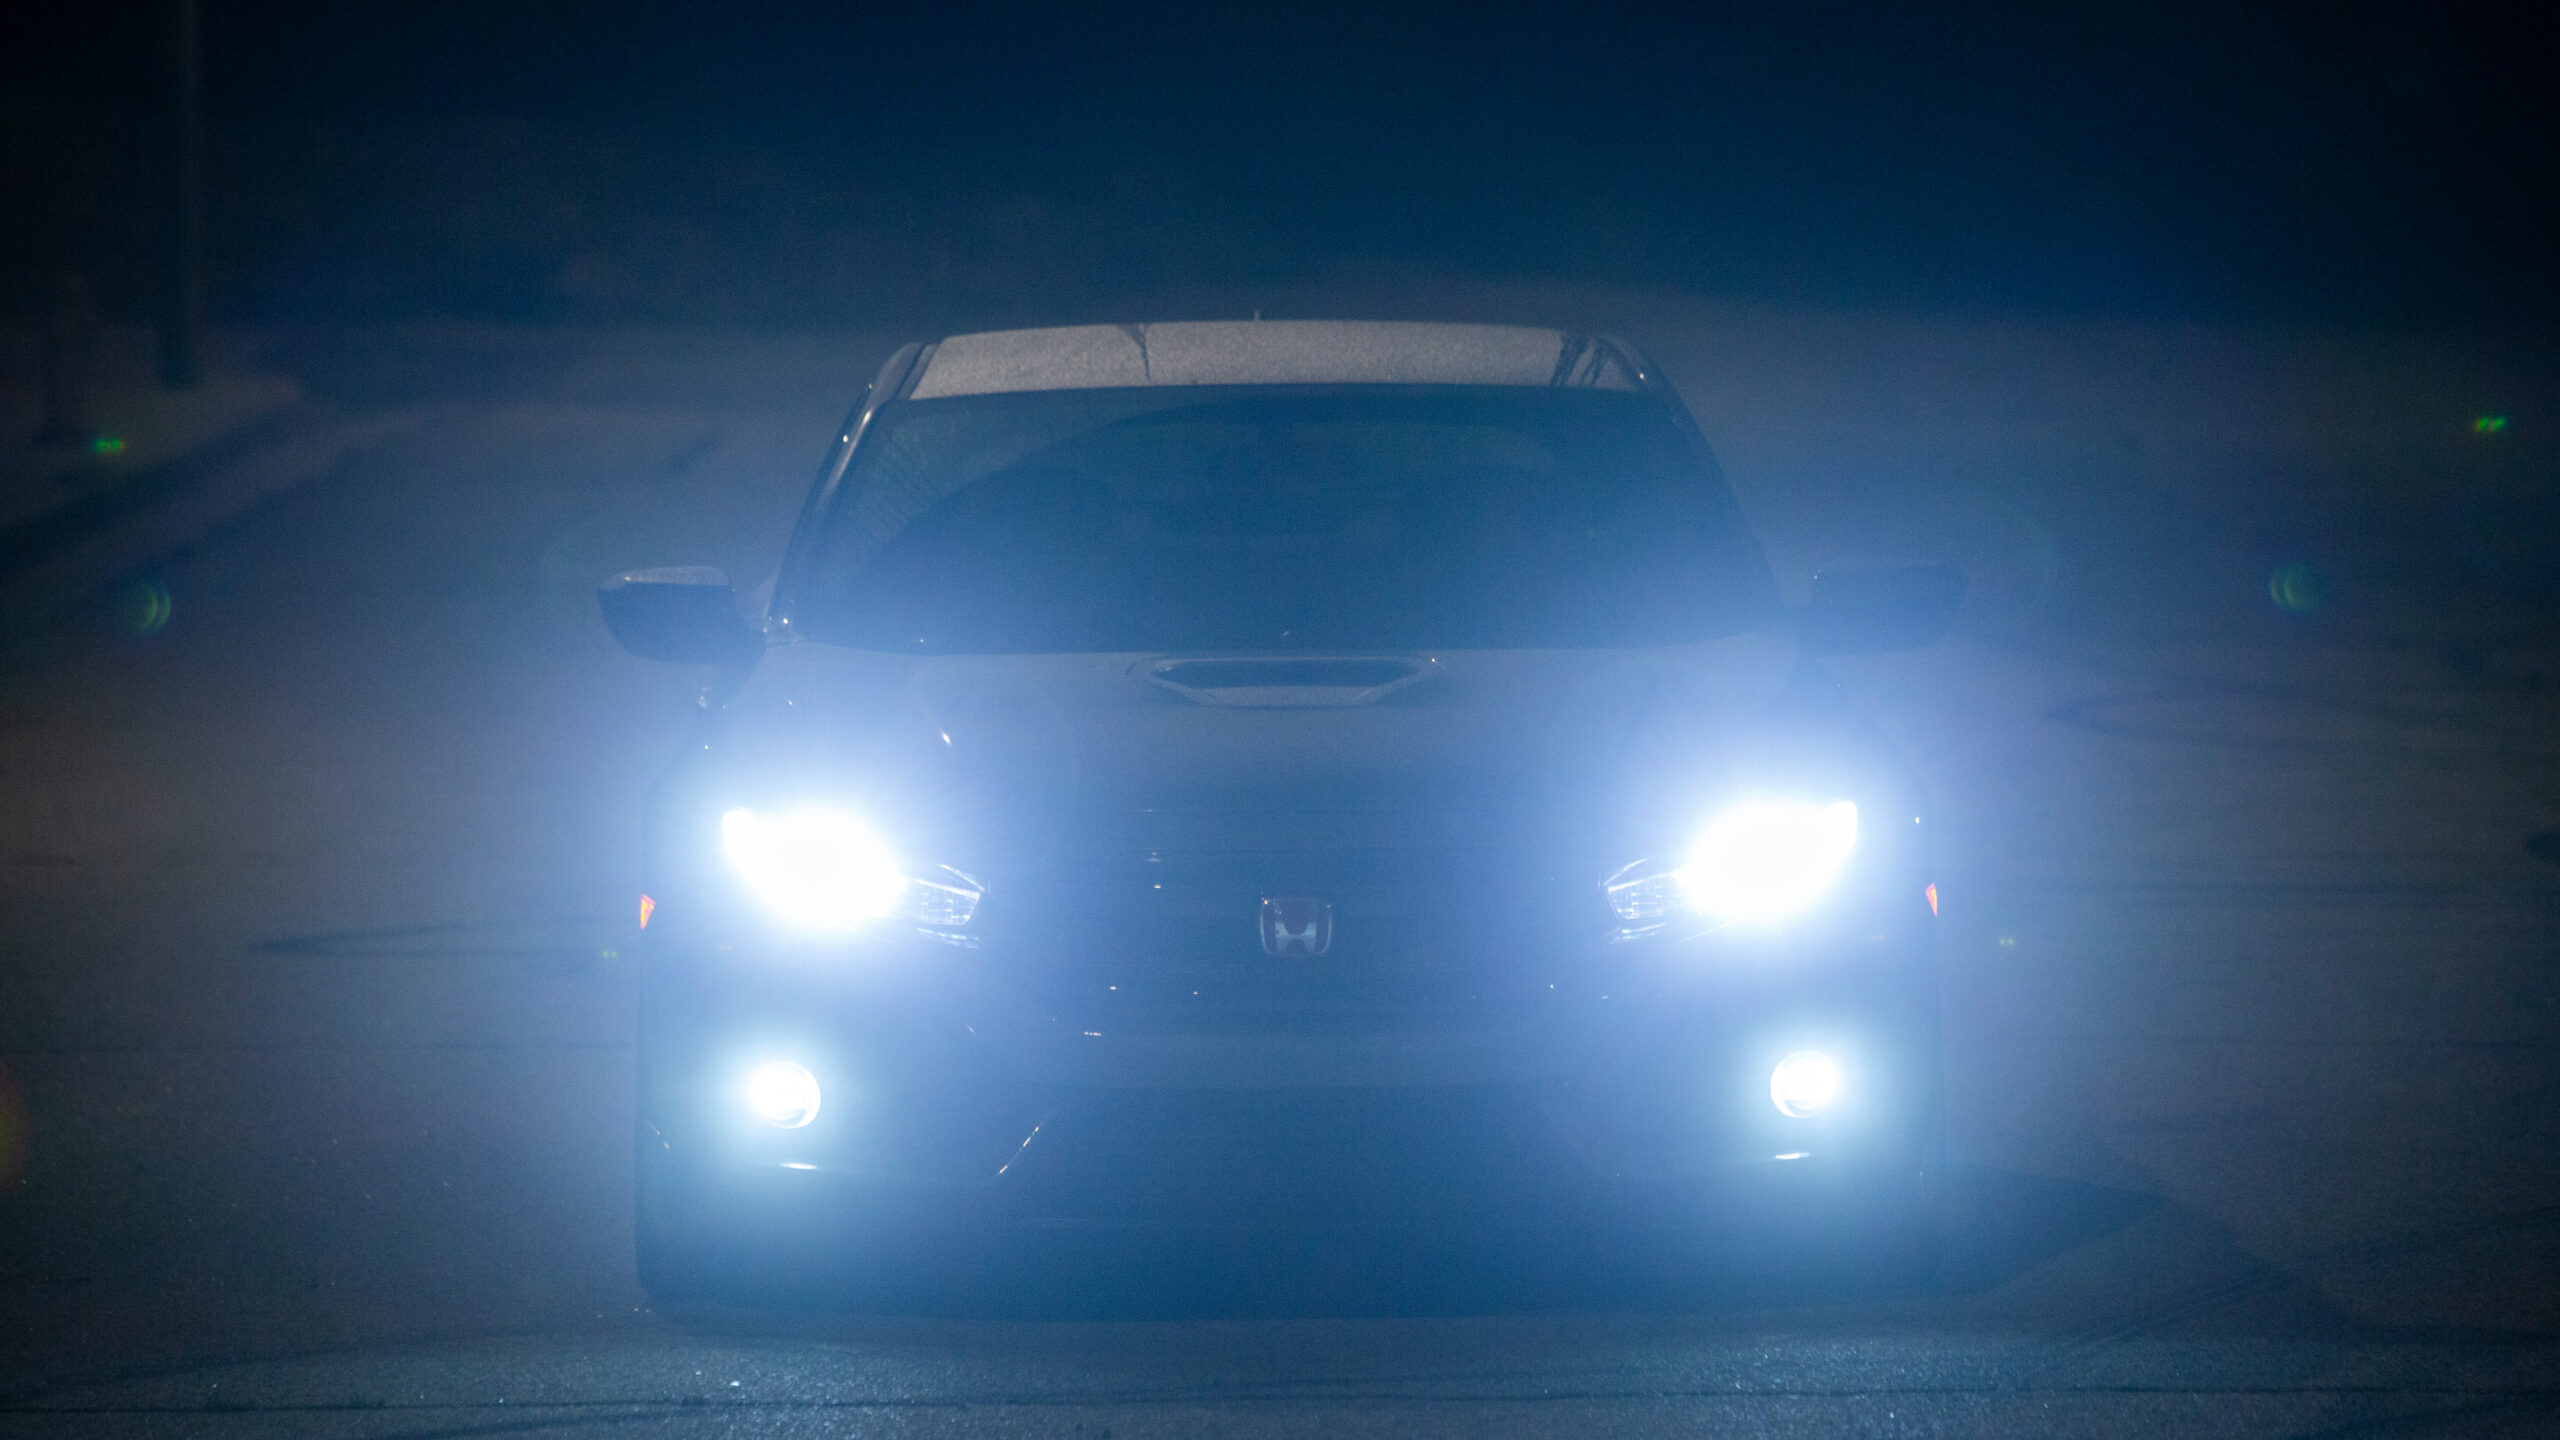 LED Headlights on Cars: Installing, Aiming, and Troubleshooting